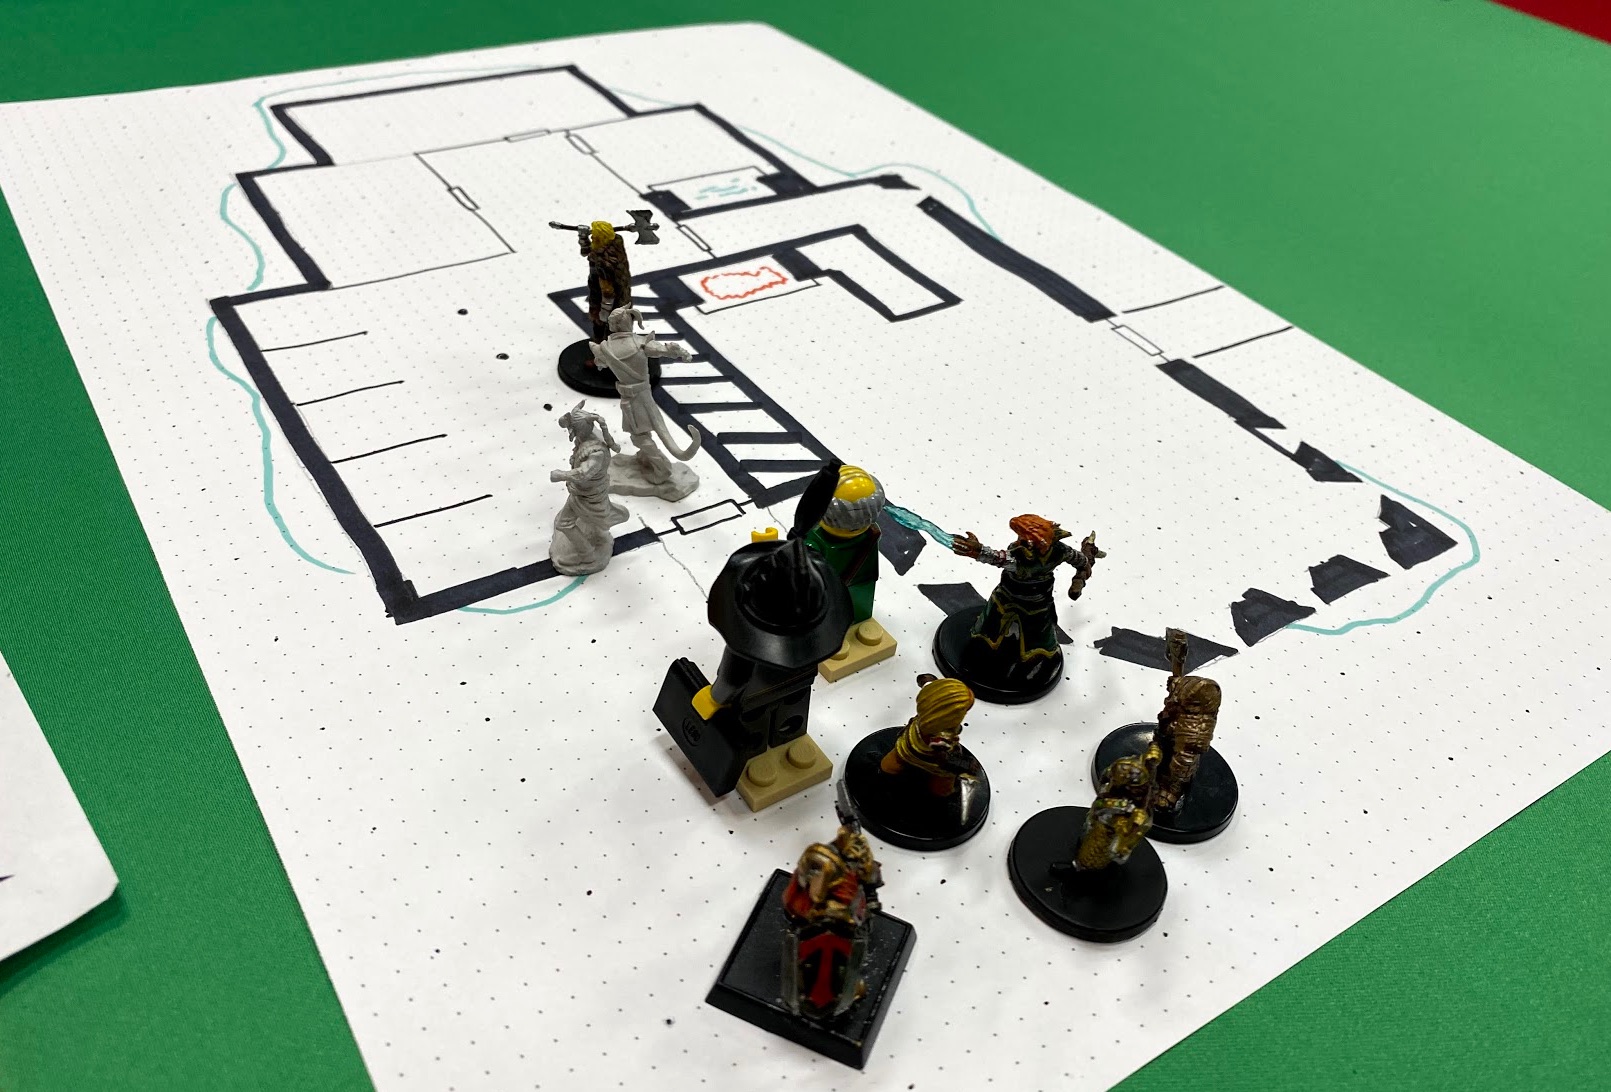 Player minis entering a dungeon